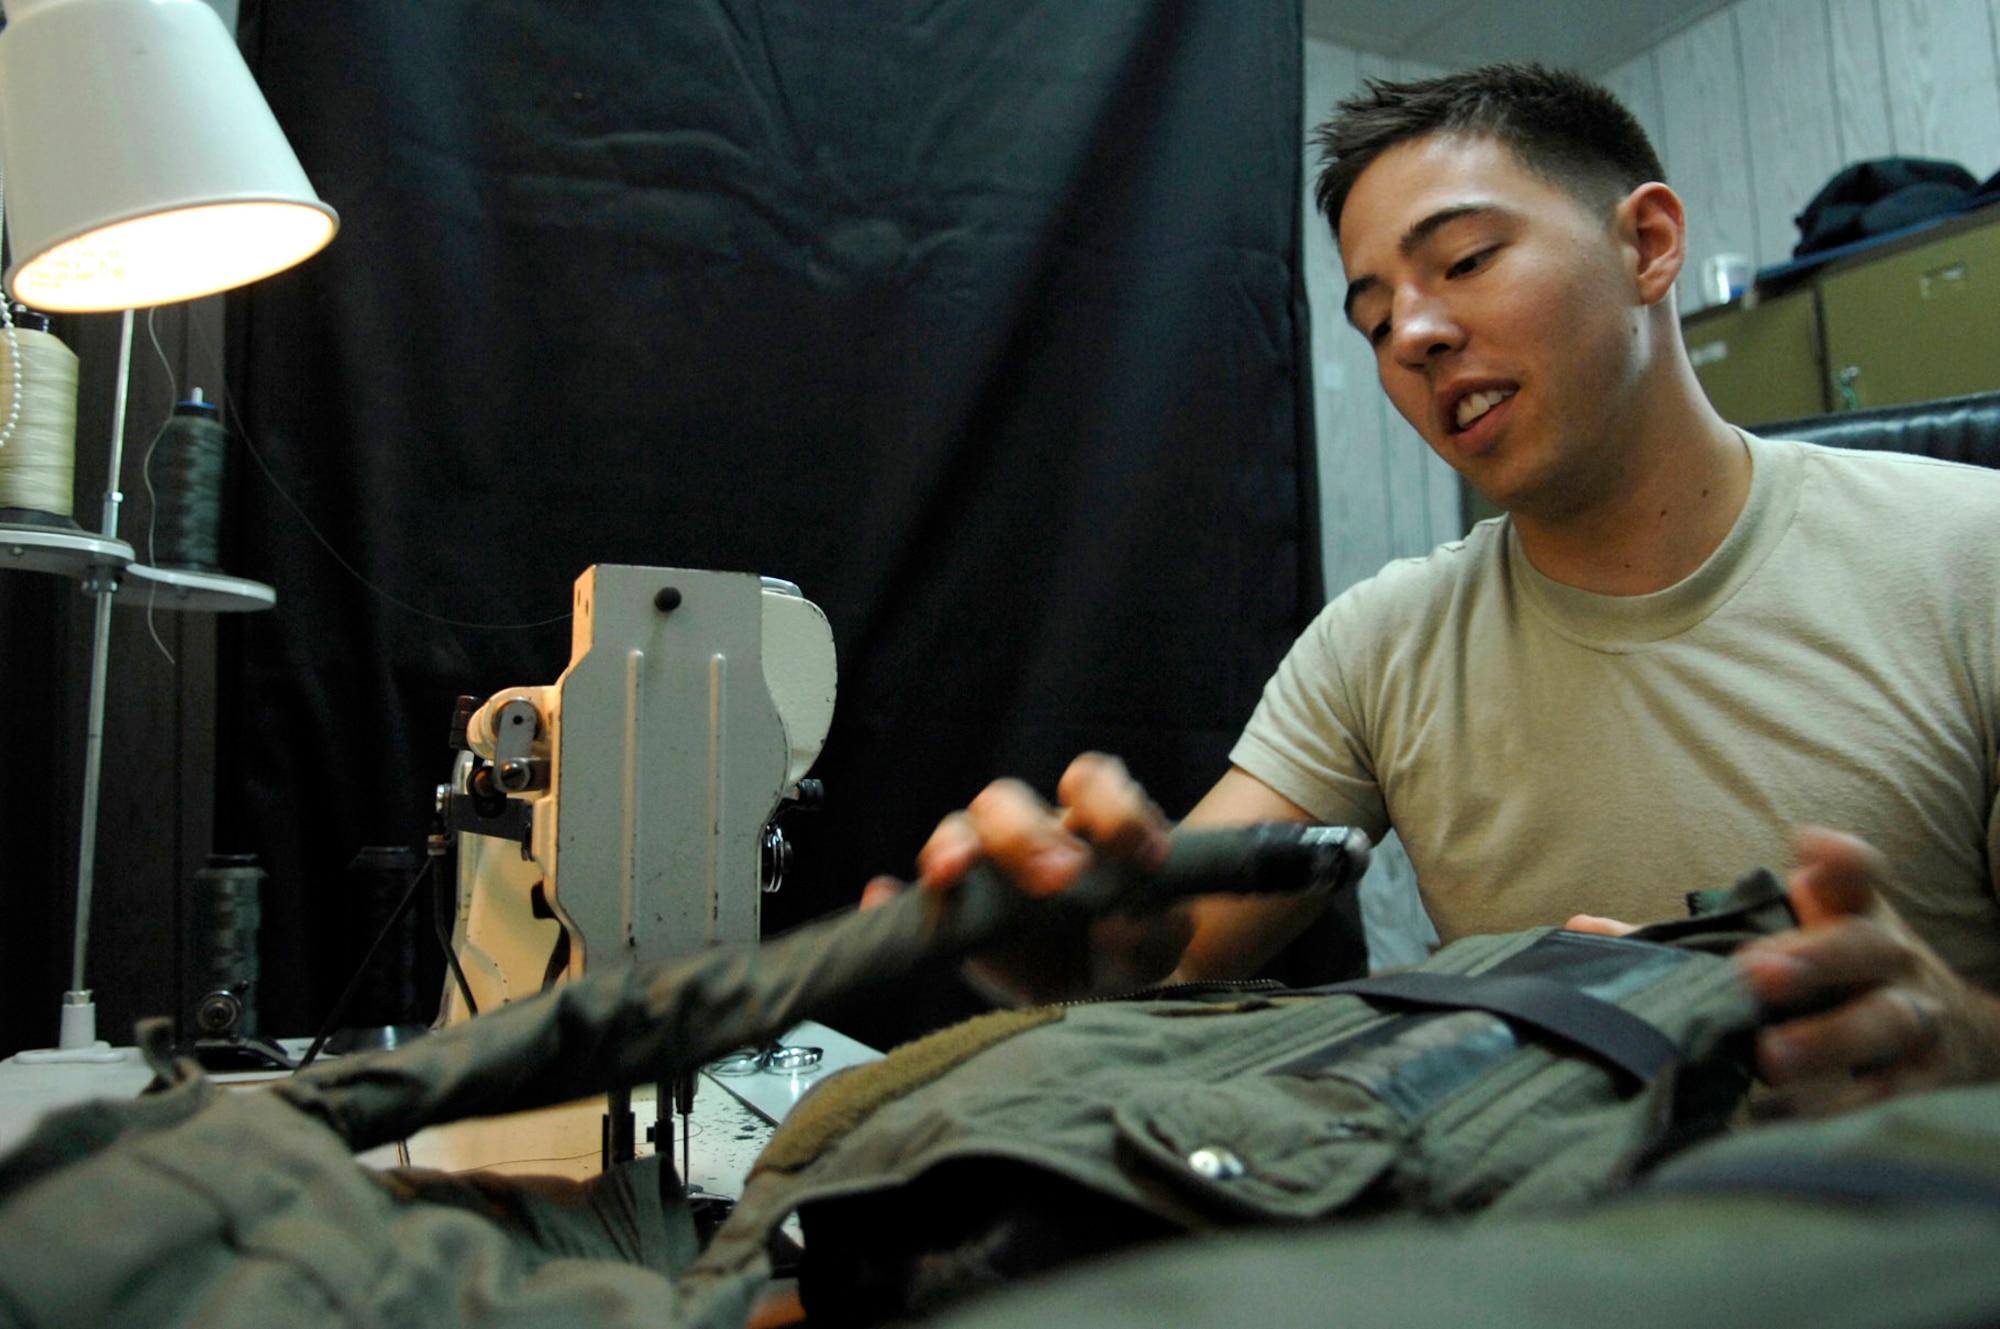 Senior Airman Nicholas Sanders inspects for tears and holes in an anti-G suit June 23 at Joint Base Balad, Iraq. The suit is worn by F-16 Fighting Falcon pilots to combat the gravitational forces experienced during high-speed maneuvers. The suit prevents blood from rushing rapidly out of the brain, helping the pilot to maintain consciousness during flight. The technicians are responsible for the maintenance and operability of all the F-16 pilot gear, including their helmets and survival equipment. Airman Sanders is a 77th Expeditionary Fighter Squadron aircraft equipment technician deployed from Shaw Air Force Base, S.C. (U.S. Air Force photo/Senior Airman Julianne Showalter) 